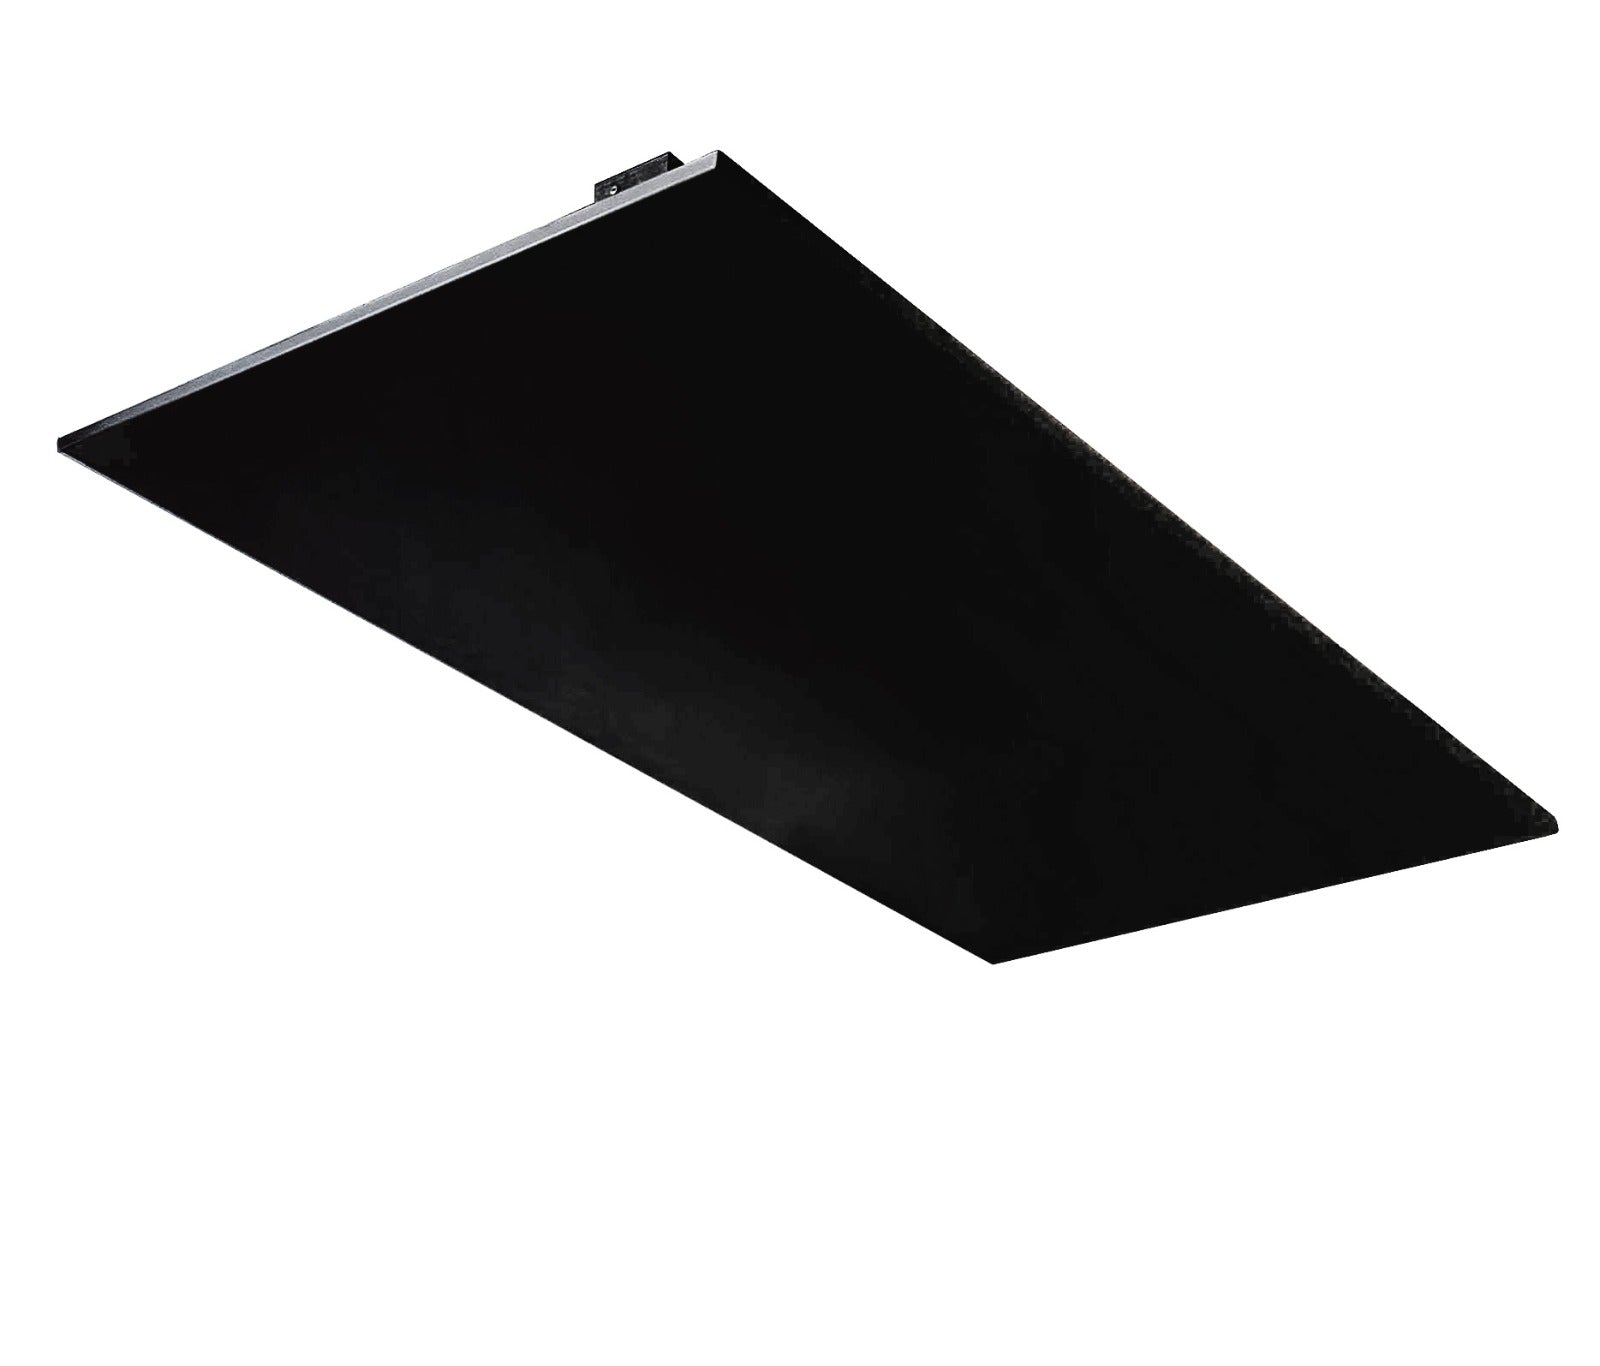 Far Infrared Heaters for Armstrong Suspended Ceiling Metal Black "LOTUS RANGE" 400-800 Watts